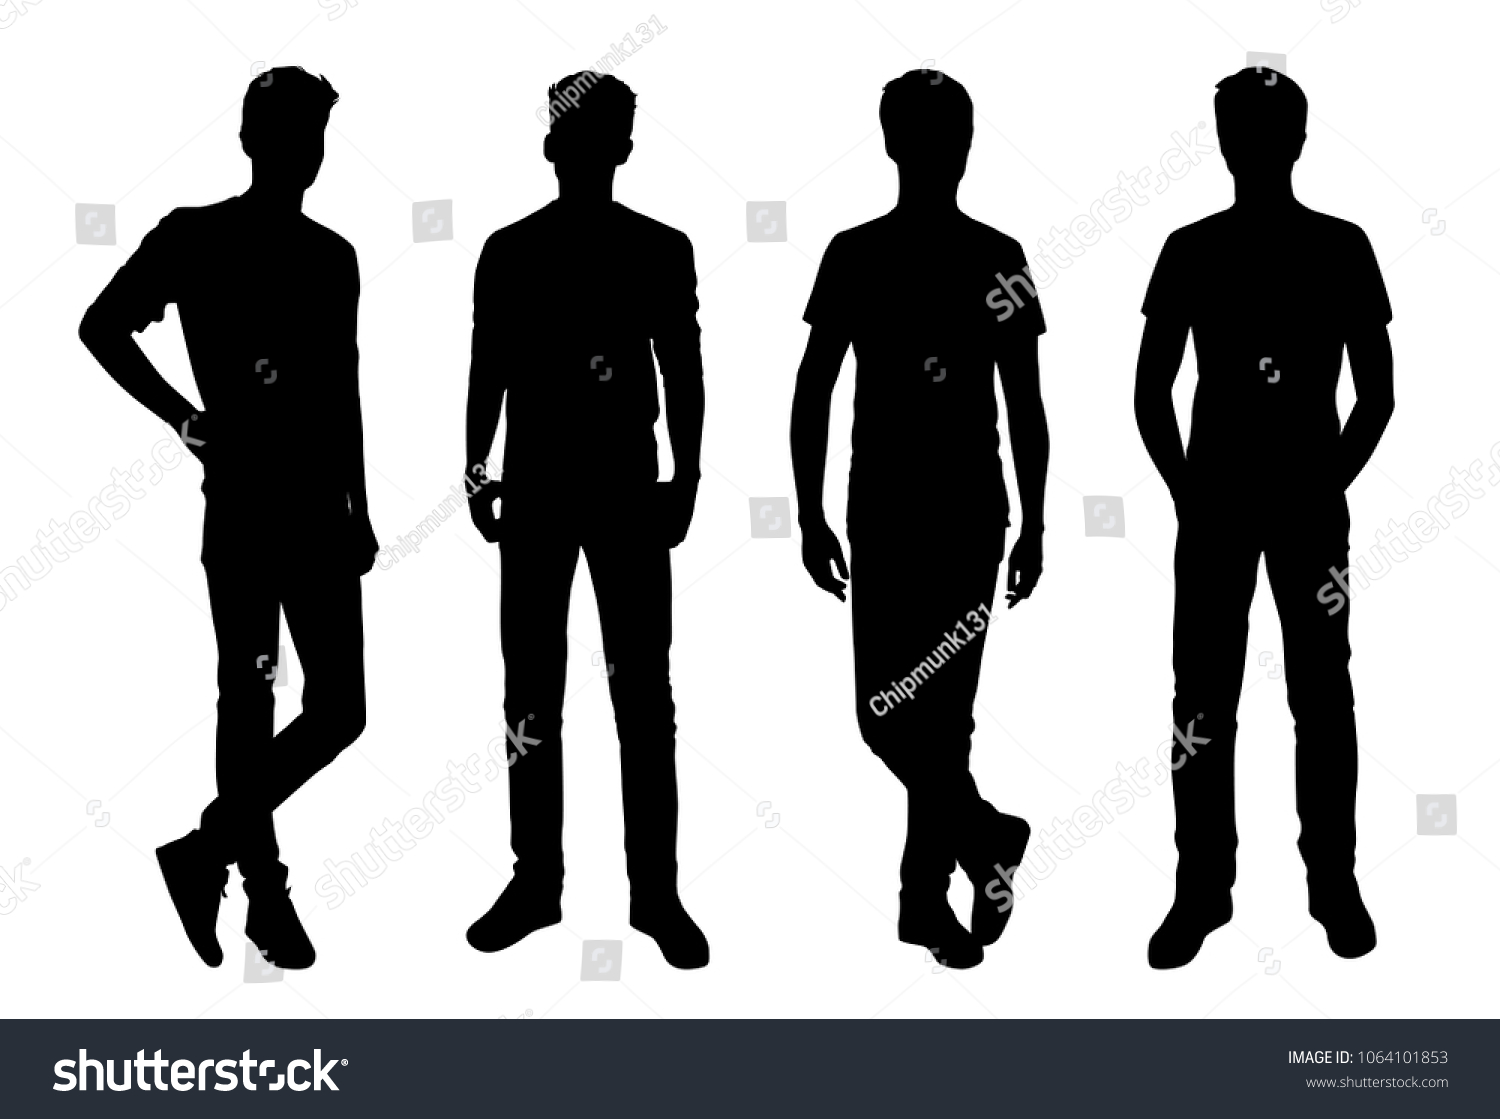 539,123 Silhouette young man Images, Stock Photos & Vectors | Shutterstock